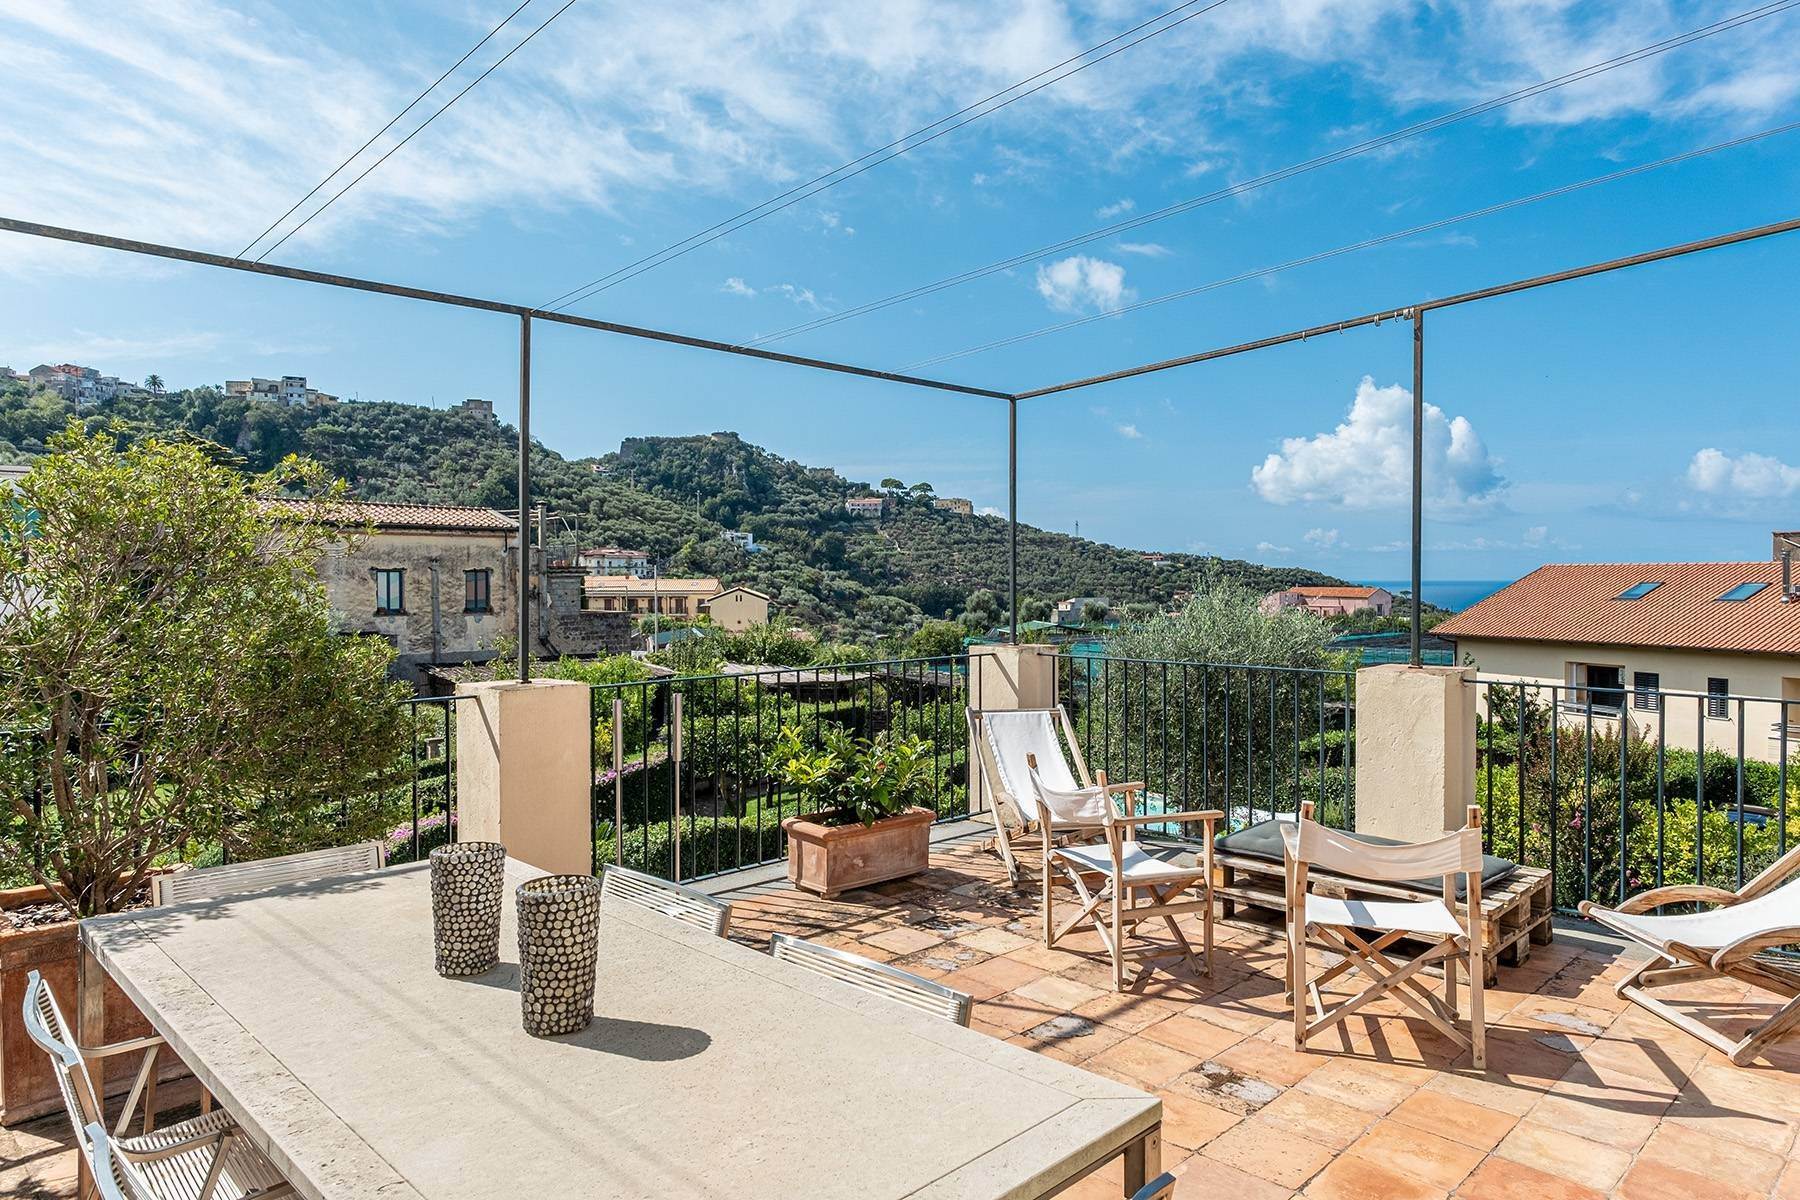 Apartments for Sale at Beautiful apartment overlooking the greenery and the sea Massa Lubrense, Naples Italy